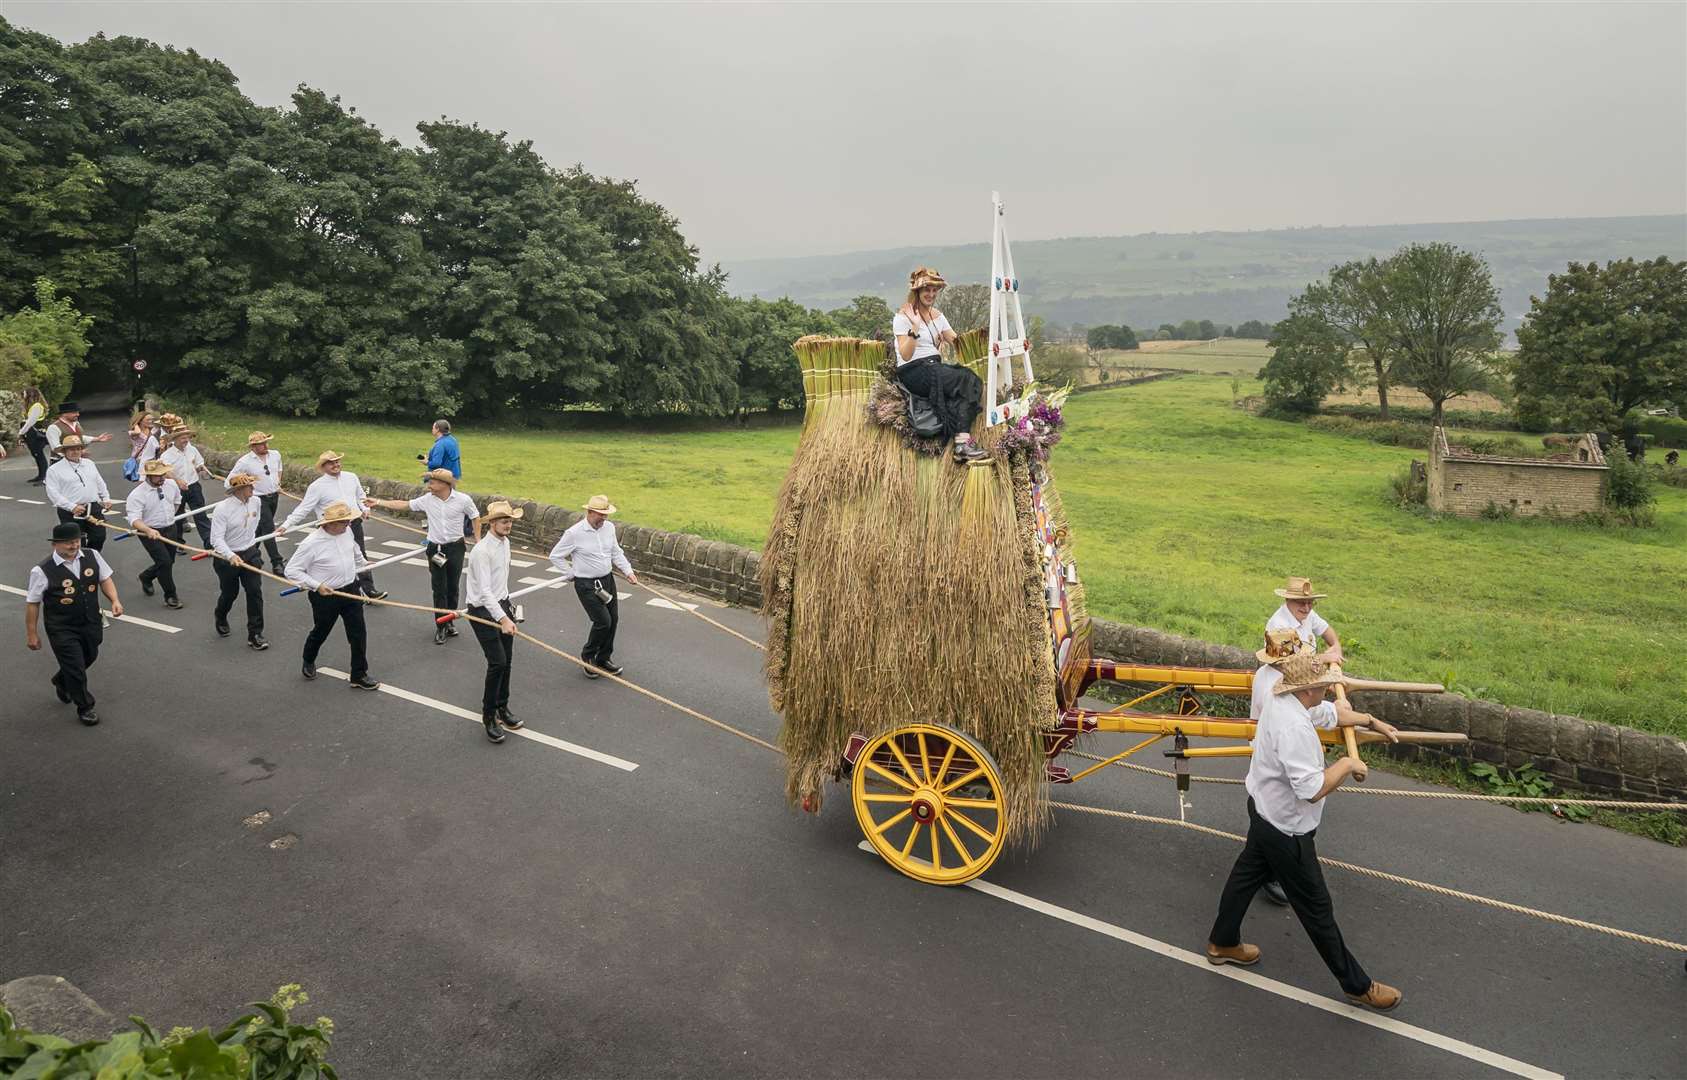 Men dressed in Panama hats, white shirts and clogs pull a 16ft-high thatched rush cart carrying a woman on top, during the Sowerby Bridge Rushbearing Festival in West Yorkshire (Danny Lawson/PA)